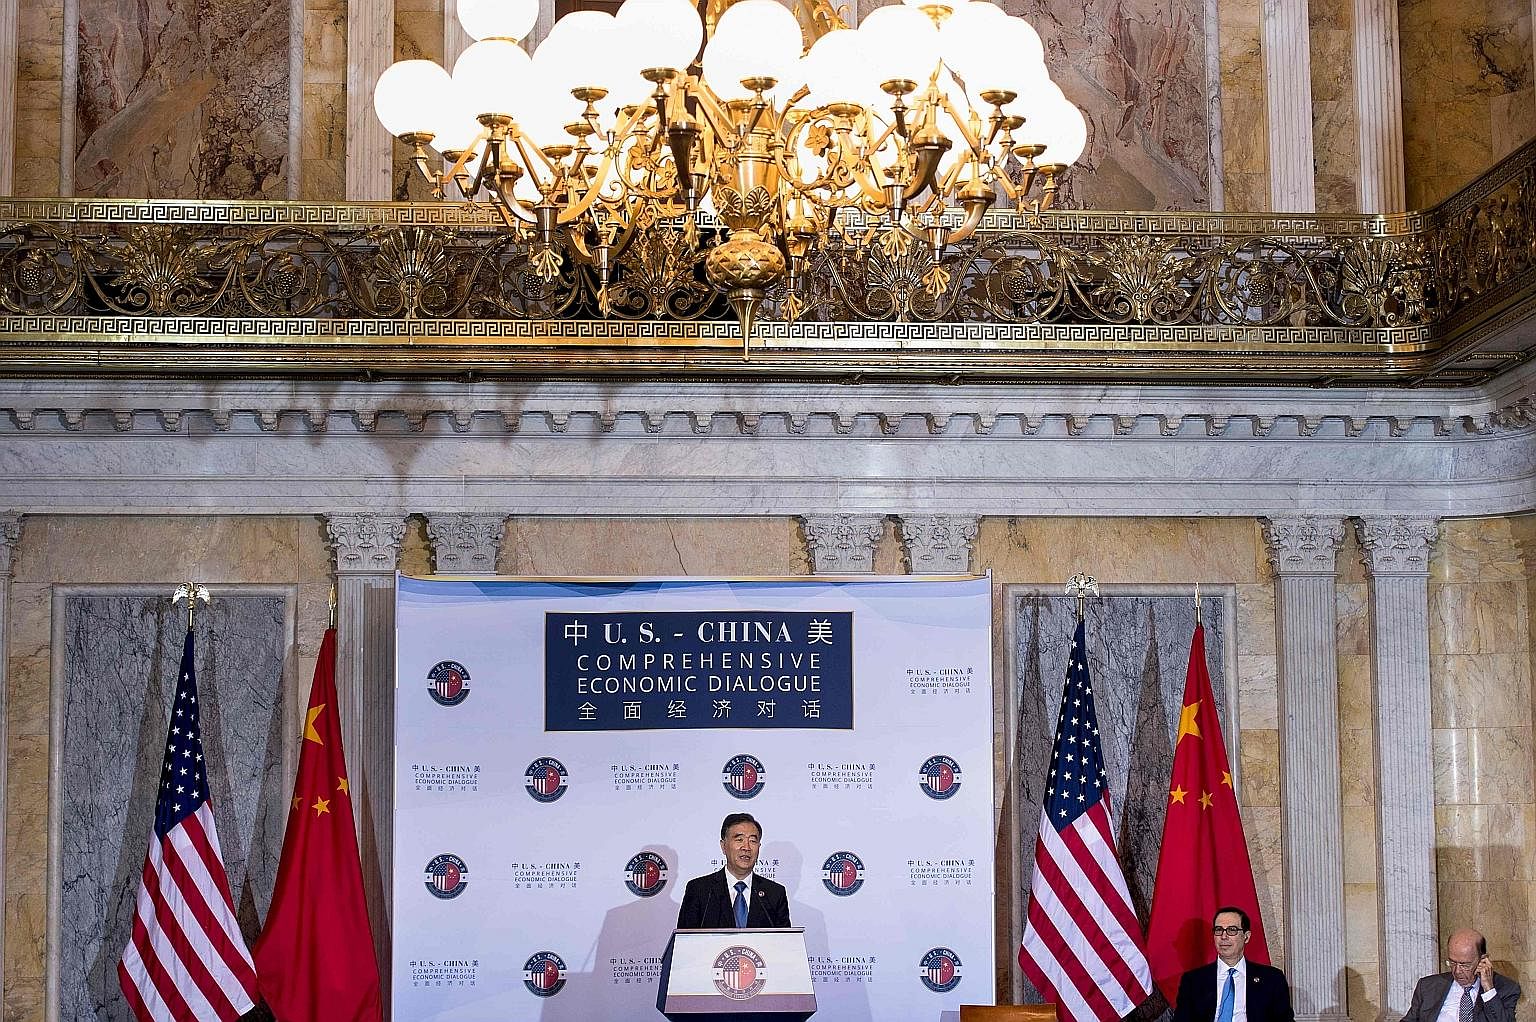 China's Vice-Premier Wang Yang speaking at the economic dialogue on Wednesday in Washington, as US Treasury Secretary Steven Mnuchin and Commerce Secretary Wilbur Ross (far right) listened.